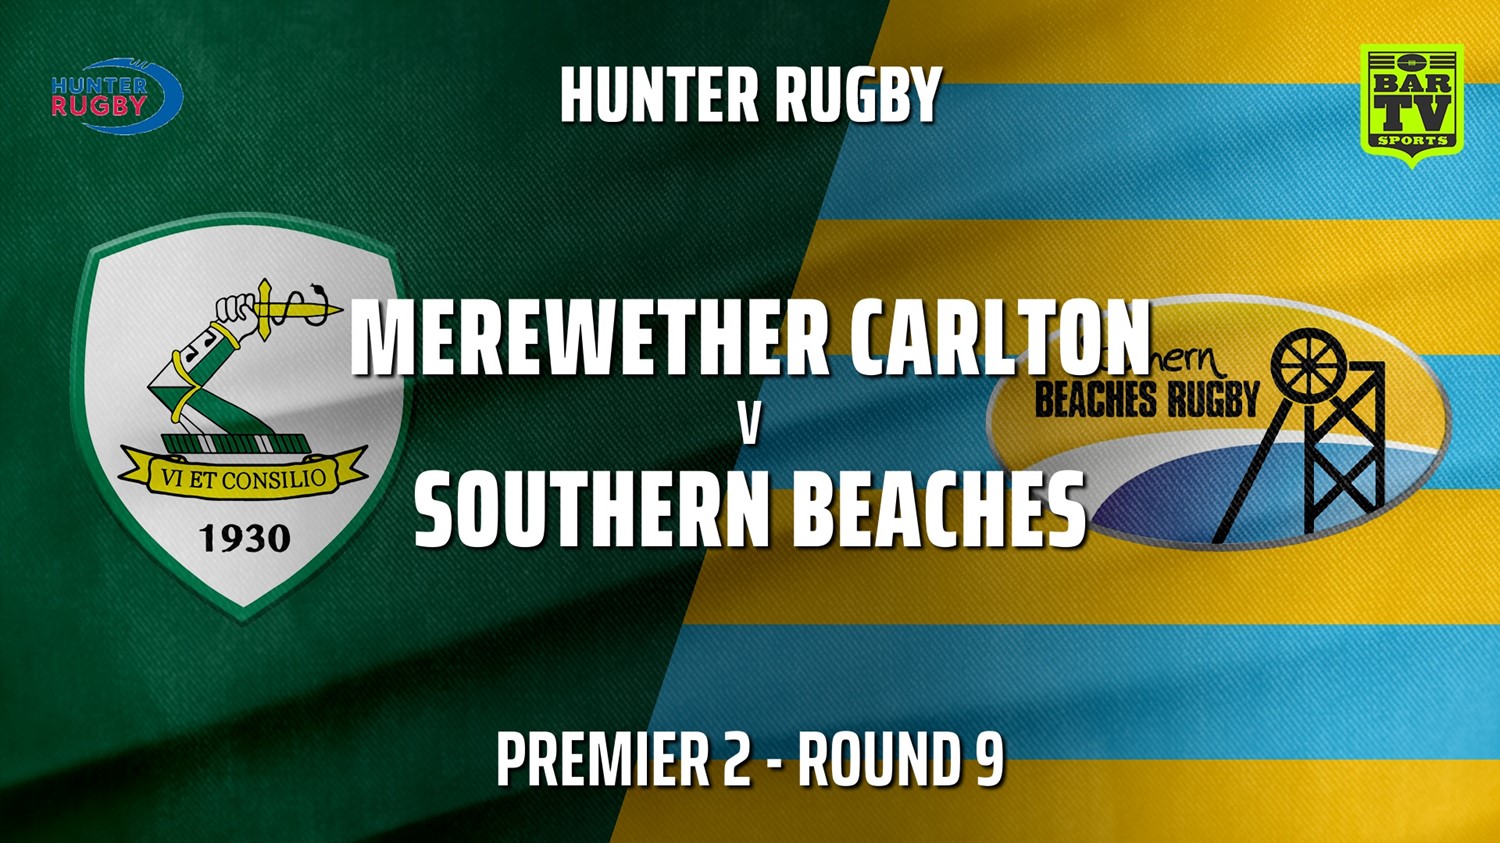 210619-Hunter Rugby Round 9 - Premier 2 - Merewether Carlton v Southern Beaches Slate Image